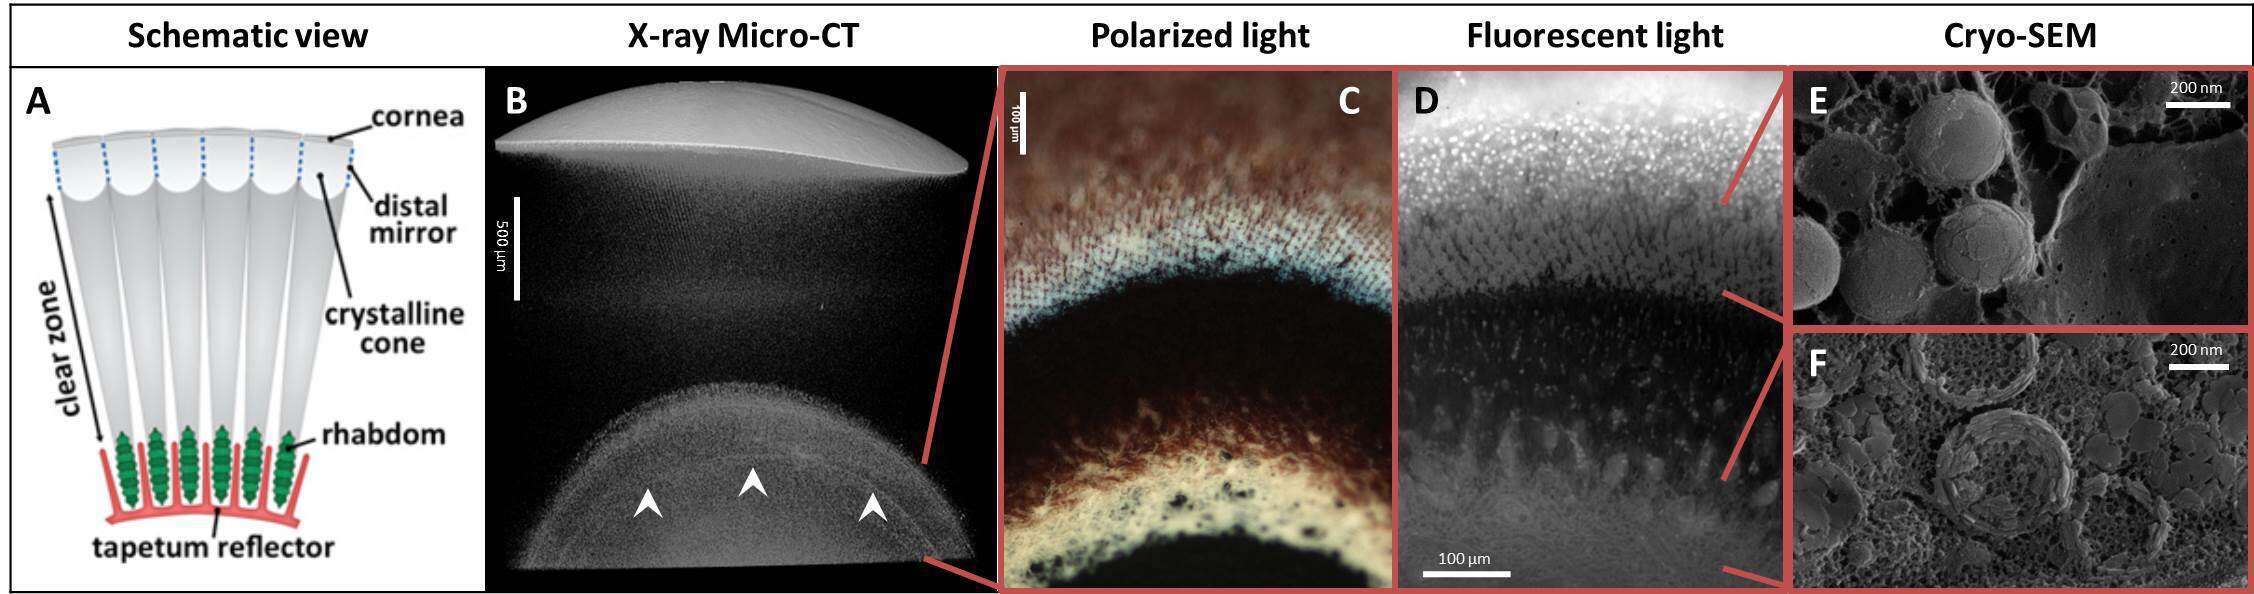 Figure 1: Millimeter-to-nanometer scale architecture of the tapetum and proximal reflectors. (A) Schematic of the reflecting compound eye viewed along the optic axis. (B) X-ray microCT scan of part of an eye, showing four high contrast features: the cornea (uppermost), distal mirror (immediately below cornea), tapetum (lower, between red lines) and proximal reflector (arrowheads, between red lines).  (C) Polarized light micrograph of the highly birefringent tapetum (upper) and proximal (lower) reflectors. (D) DAPI stained fluorescent microscopy image of the tapetum and proximal reflectors, showing cell nuclei (tapetum layer), isoxanthopterin auto-fluorescence (tapetum and proximal layers) and myelin auto-fluorescence (proximal layer). (E) - (F) Cryo-SEM images from the tapetum (E) and the proximal reflector (F) regions displaying crystalline isoxanthopterin nanoparticles.